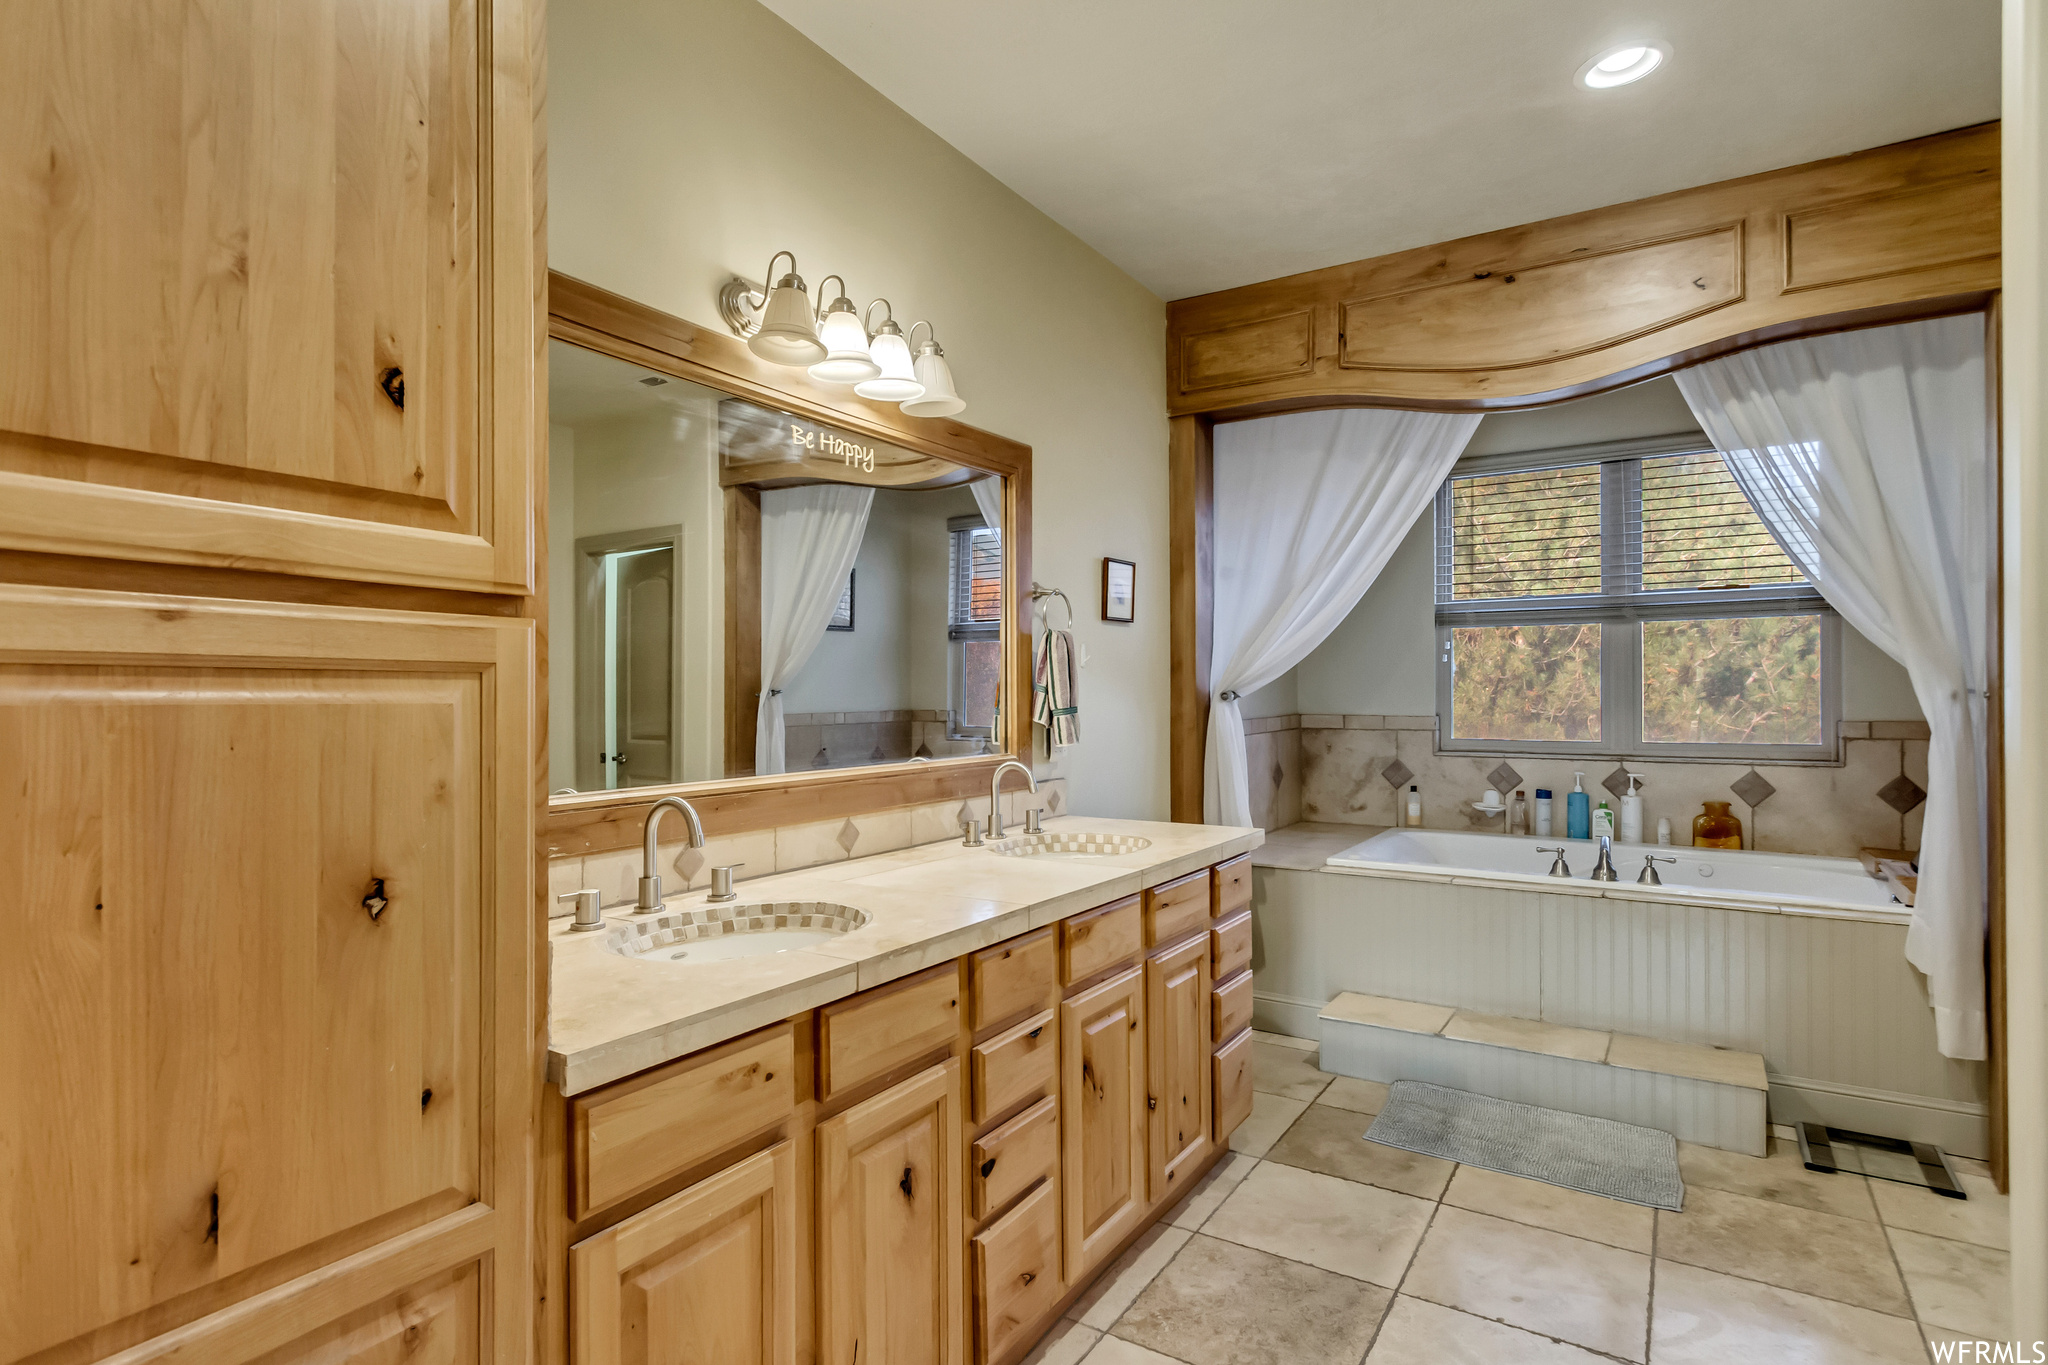 Bathroom featuring tile floors, dual sinks, a bath, and vanity with extensive cabinet space